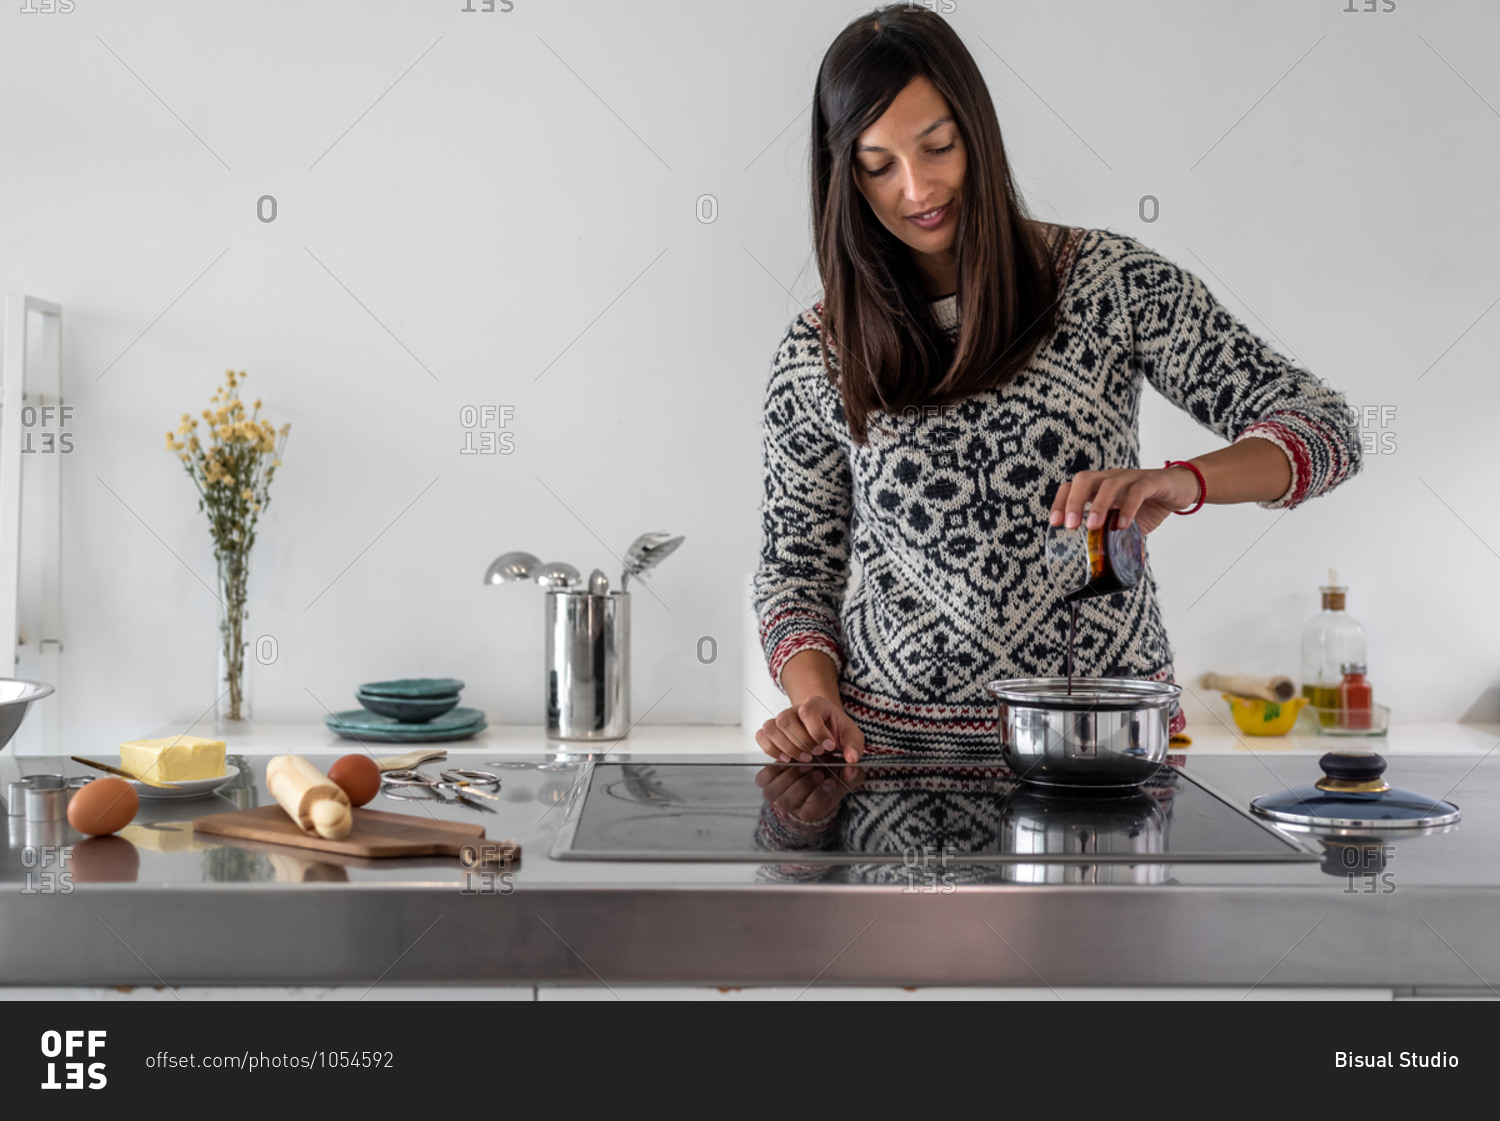 Woman cooking some gingerbread men at bright kitchen